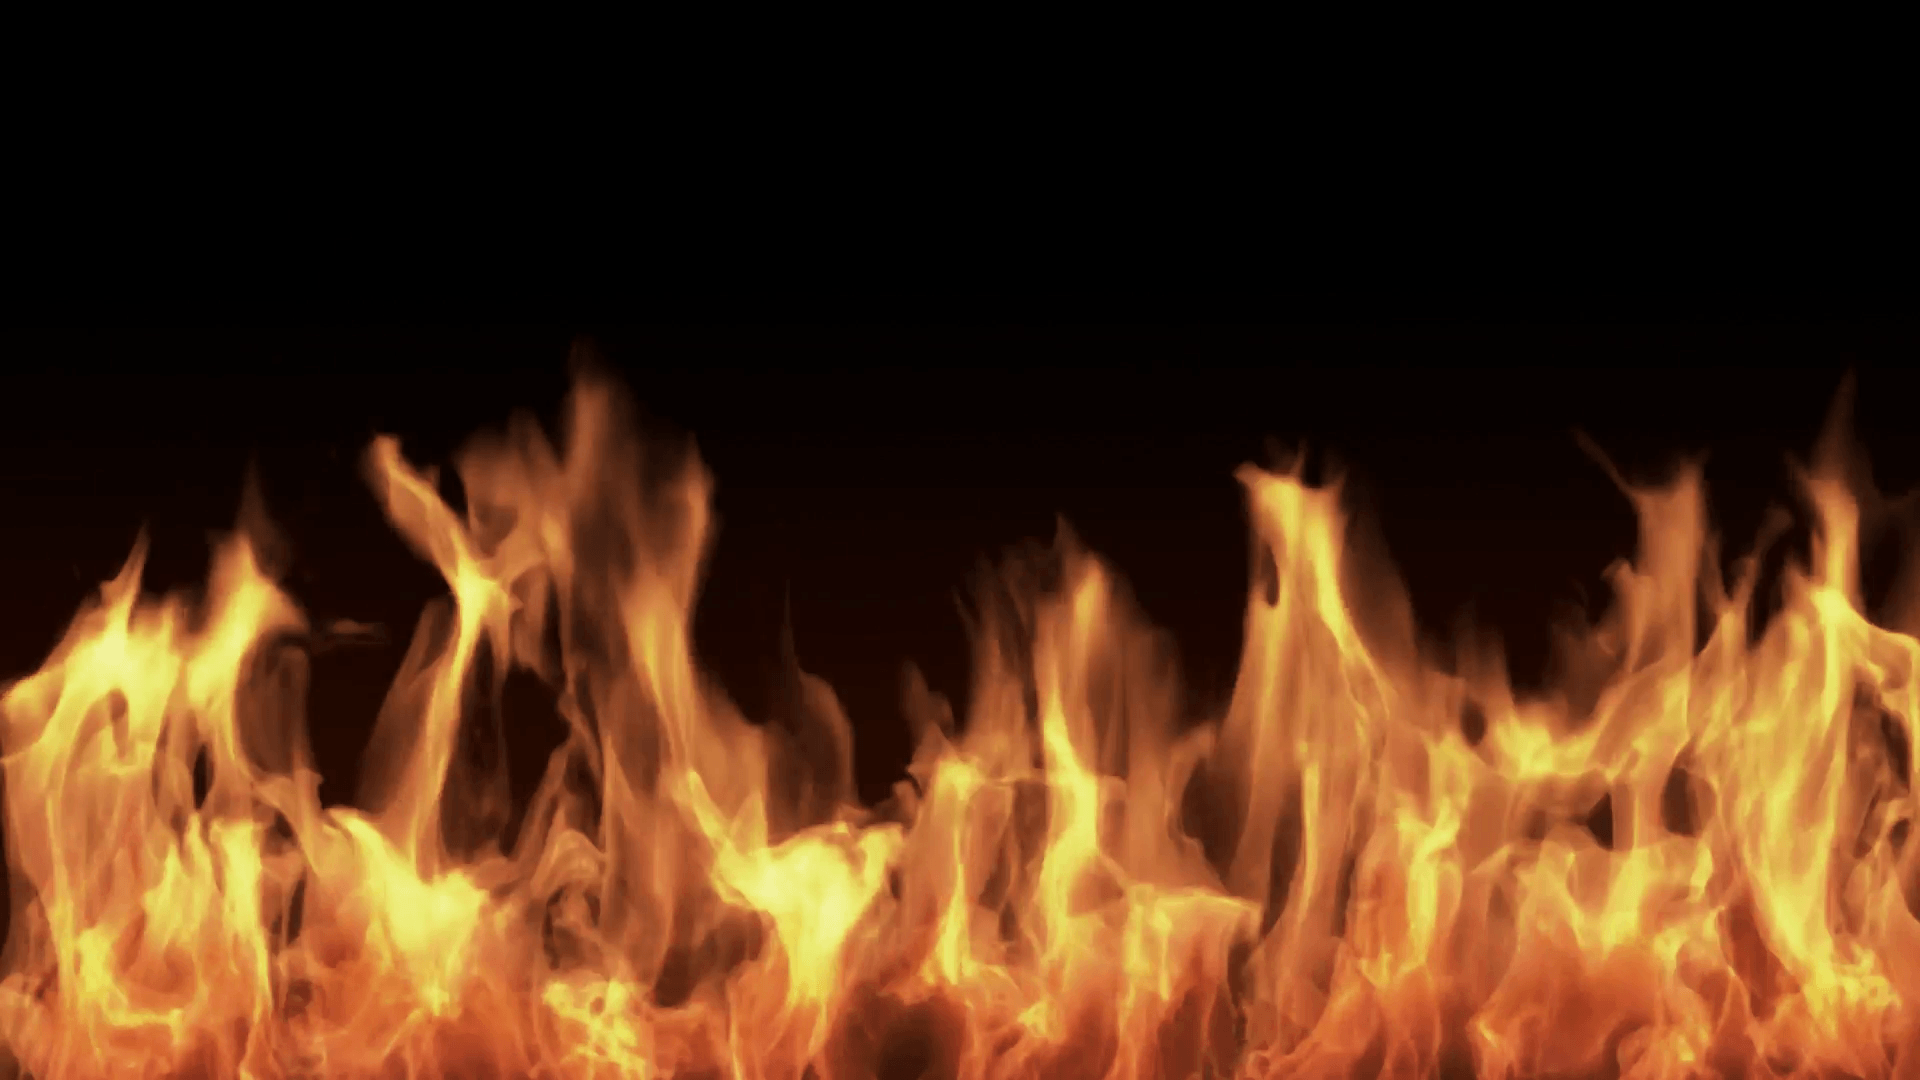 Fire Images On Black Backgrounds - Wallpaper Cave